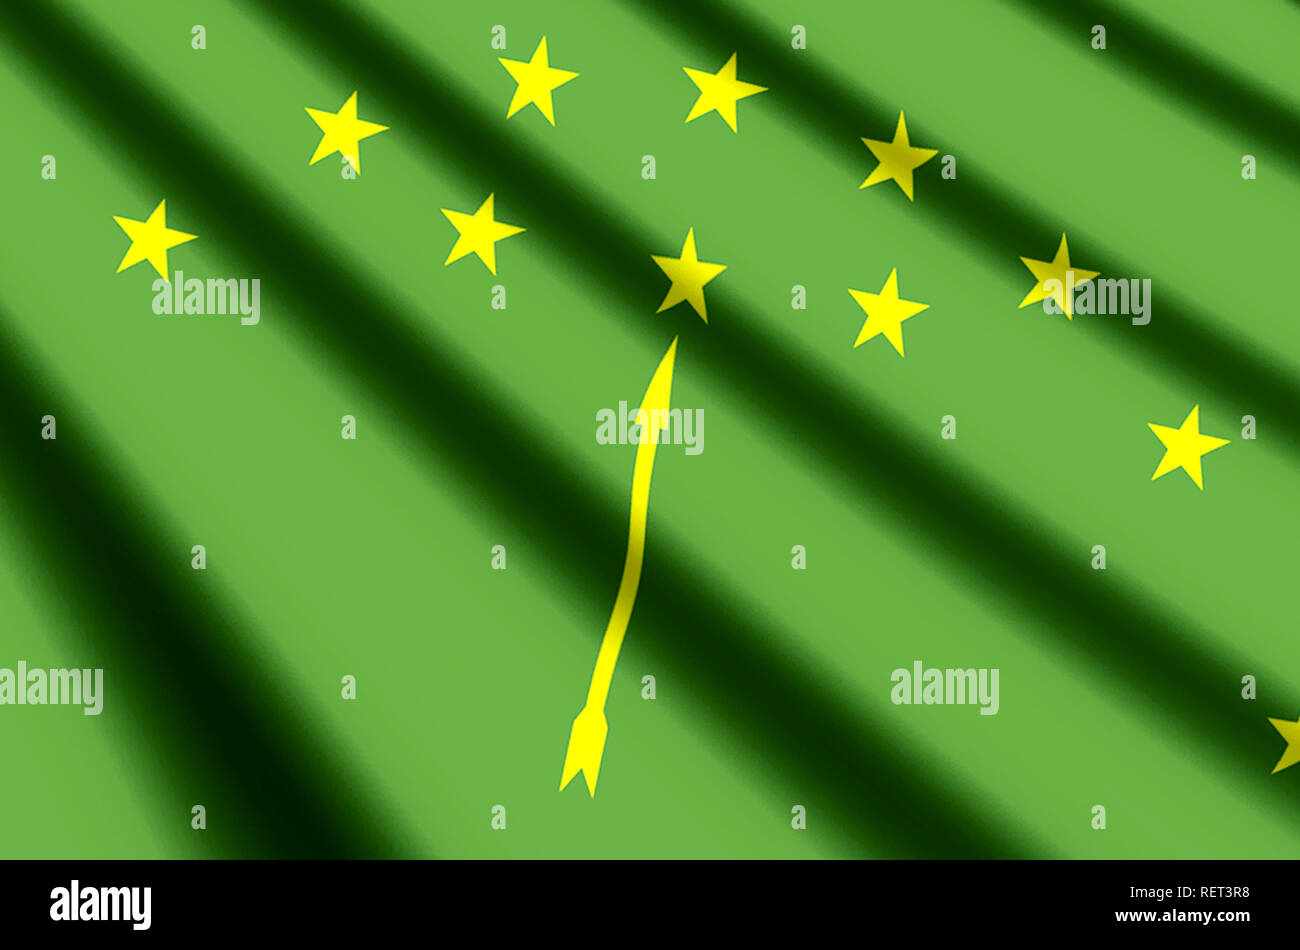 Adygea waving and closeup flag illustration. Perfect for background or texture purposes. Stock Photo